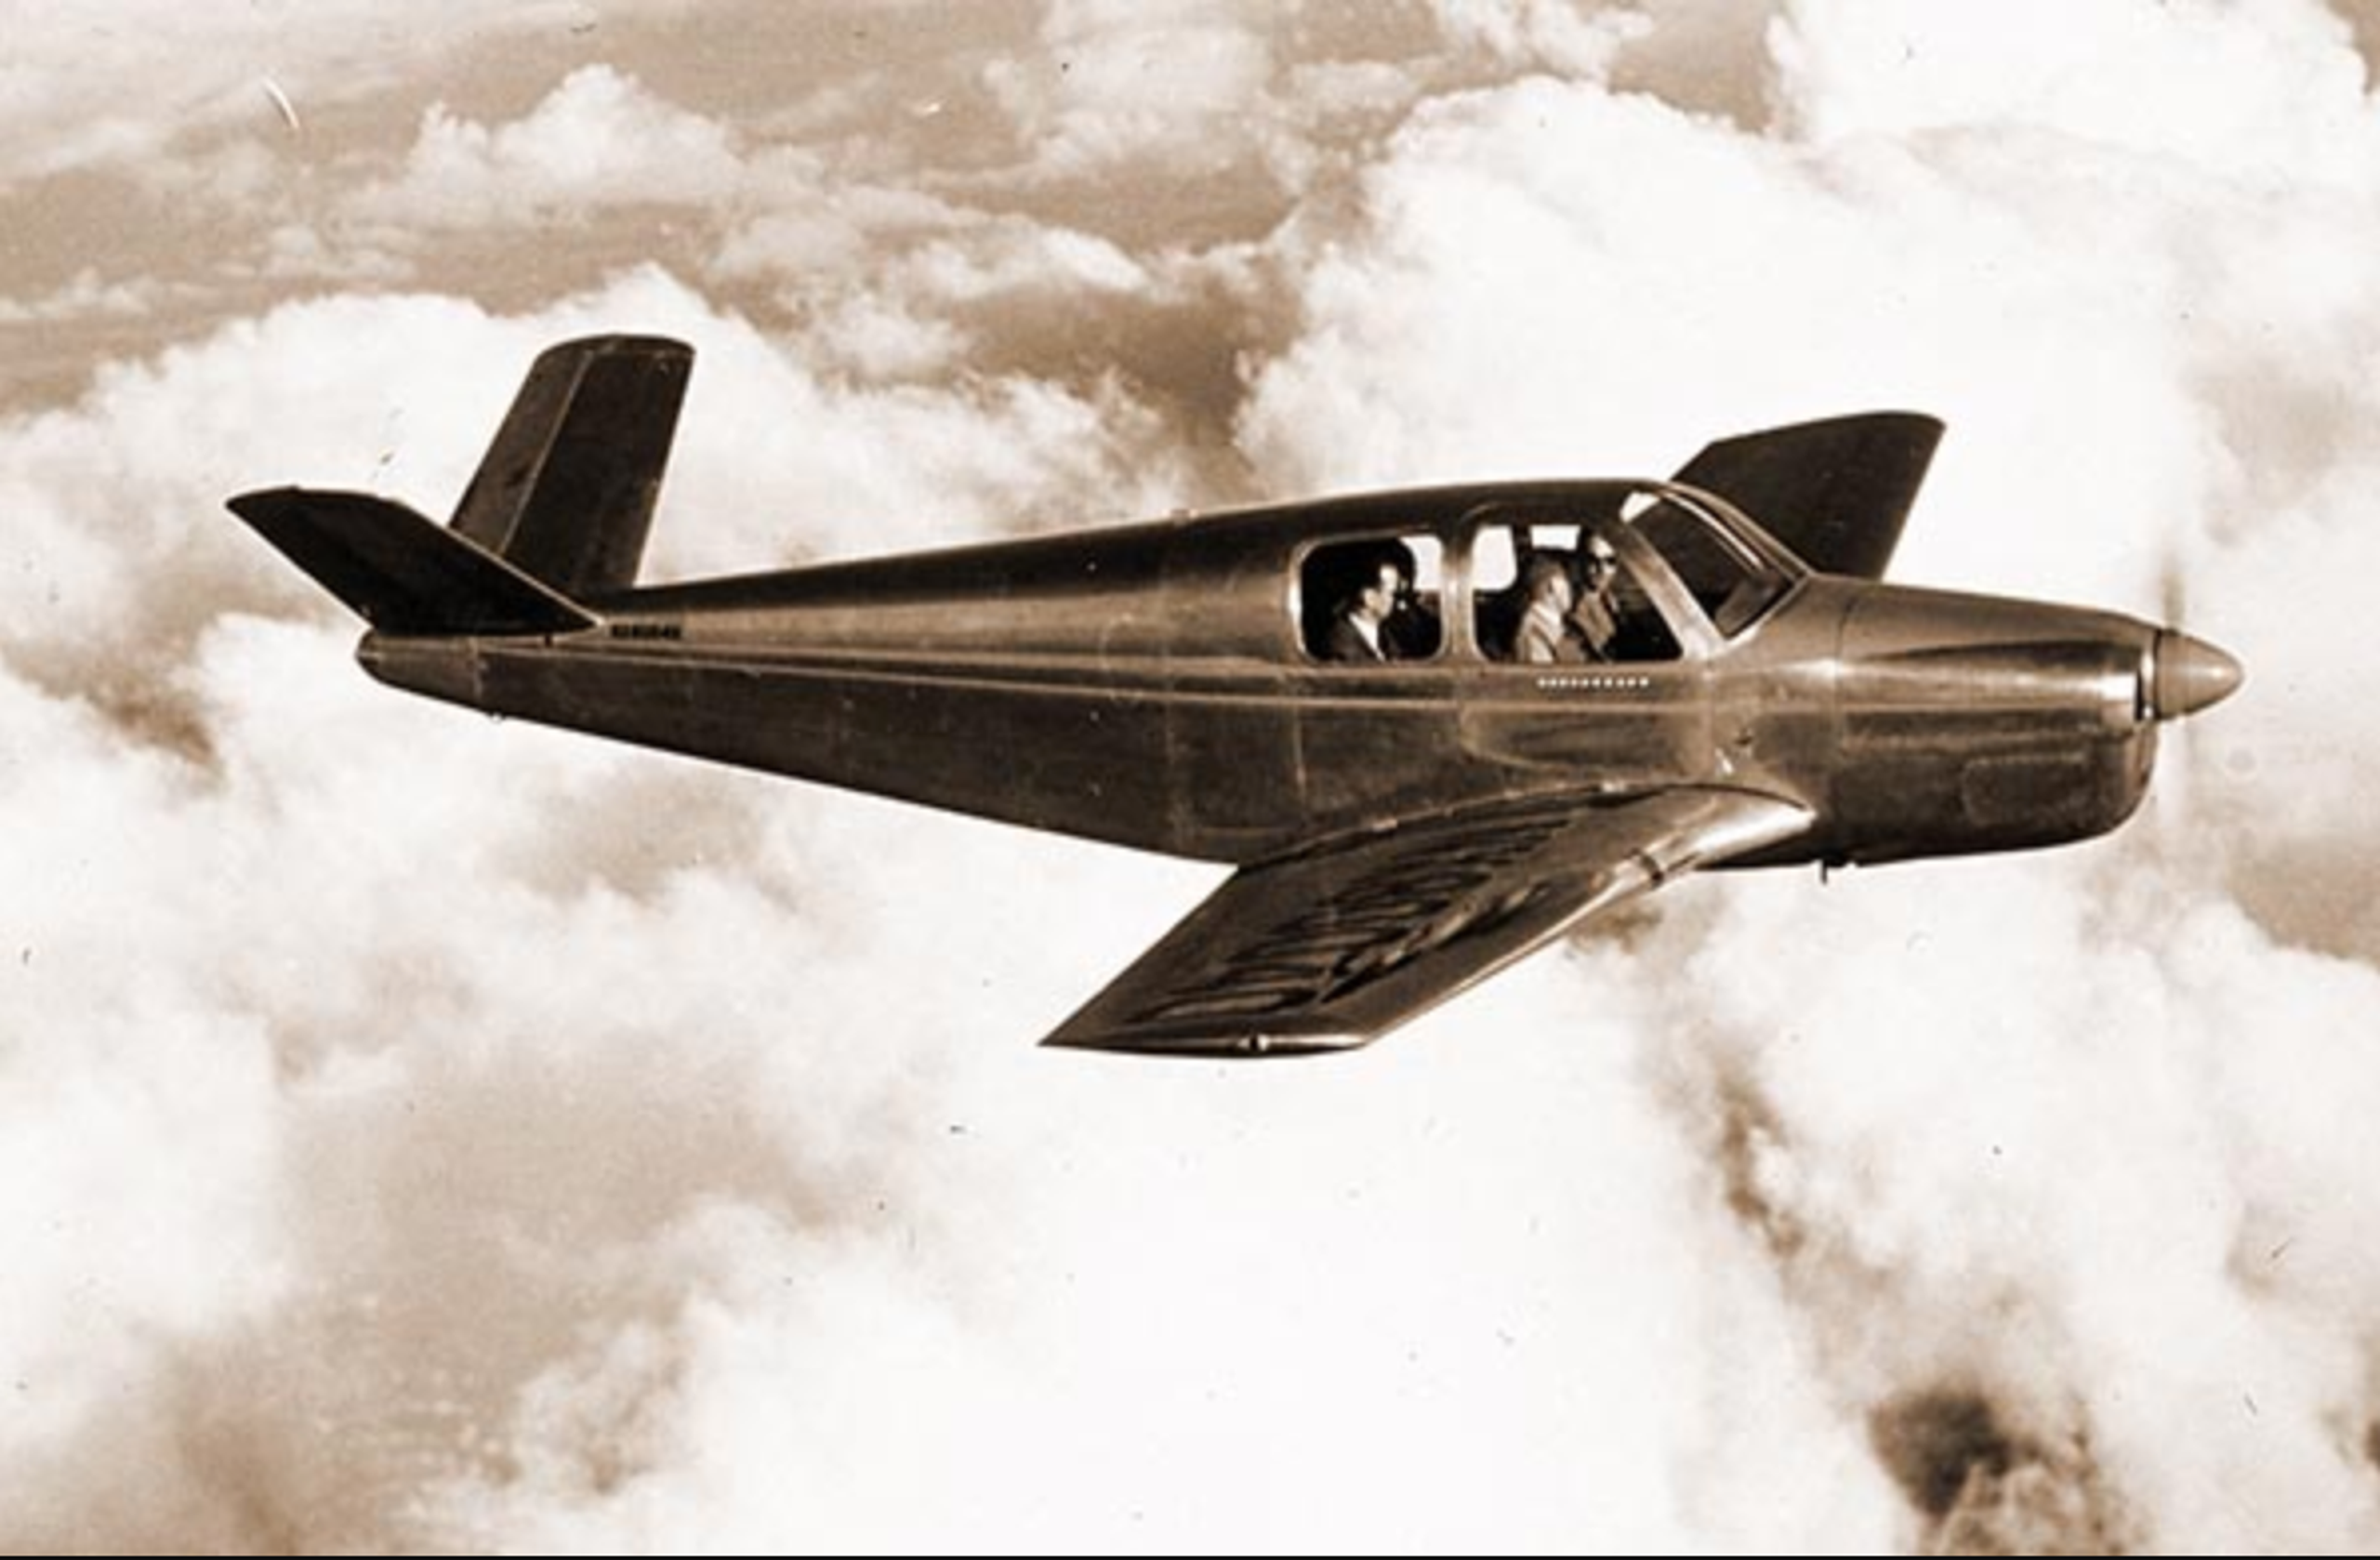 On Sept. 13, 1952, an off-duty Air Force Reserve pilot was flying a Beechcraft Bonanza single-engine plane over Allentown when he said he spotted a UFO and that the object followed him through the sky. The incident was reported to Project Blue Book.